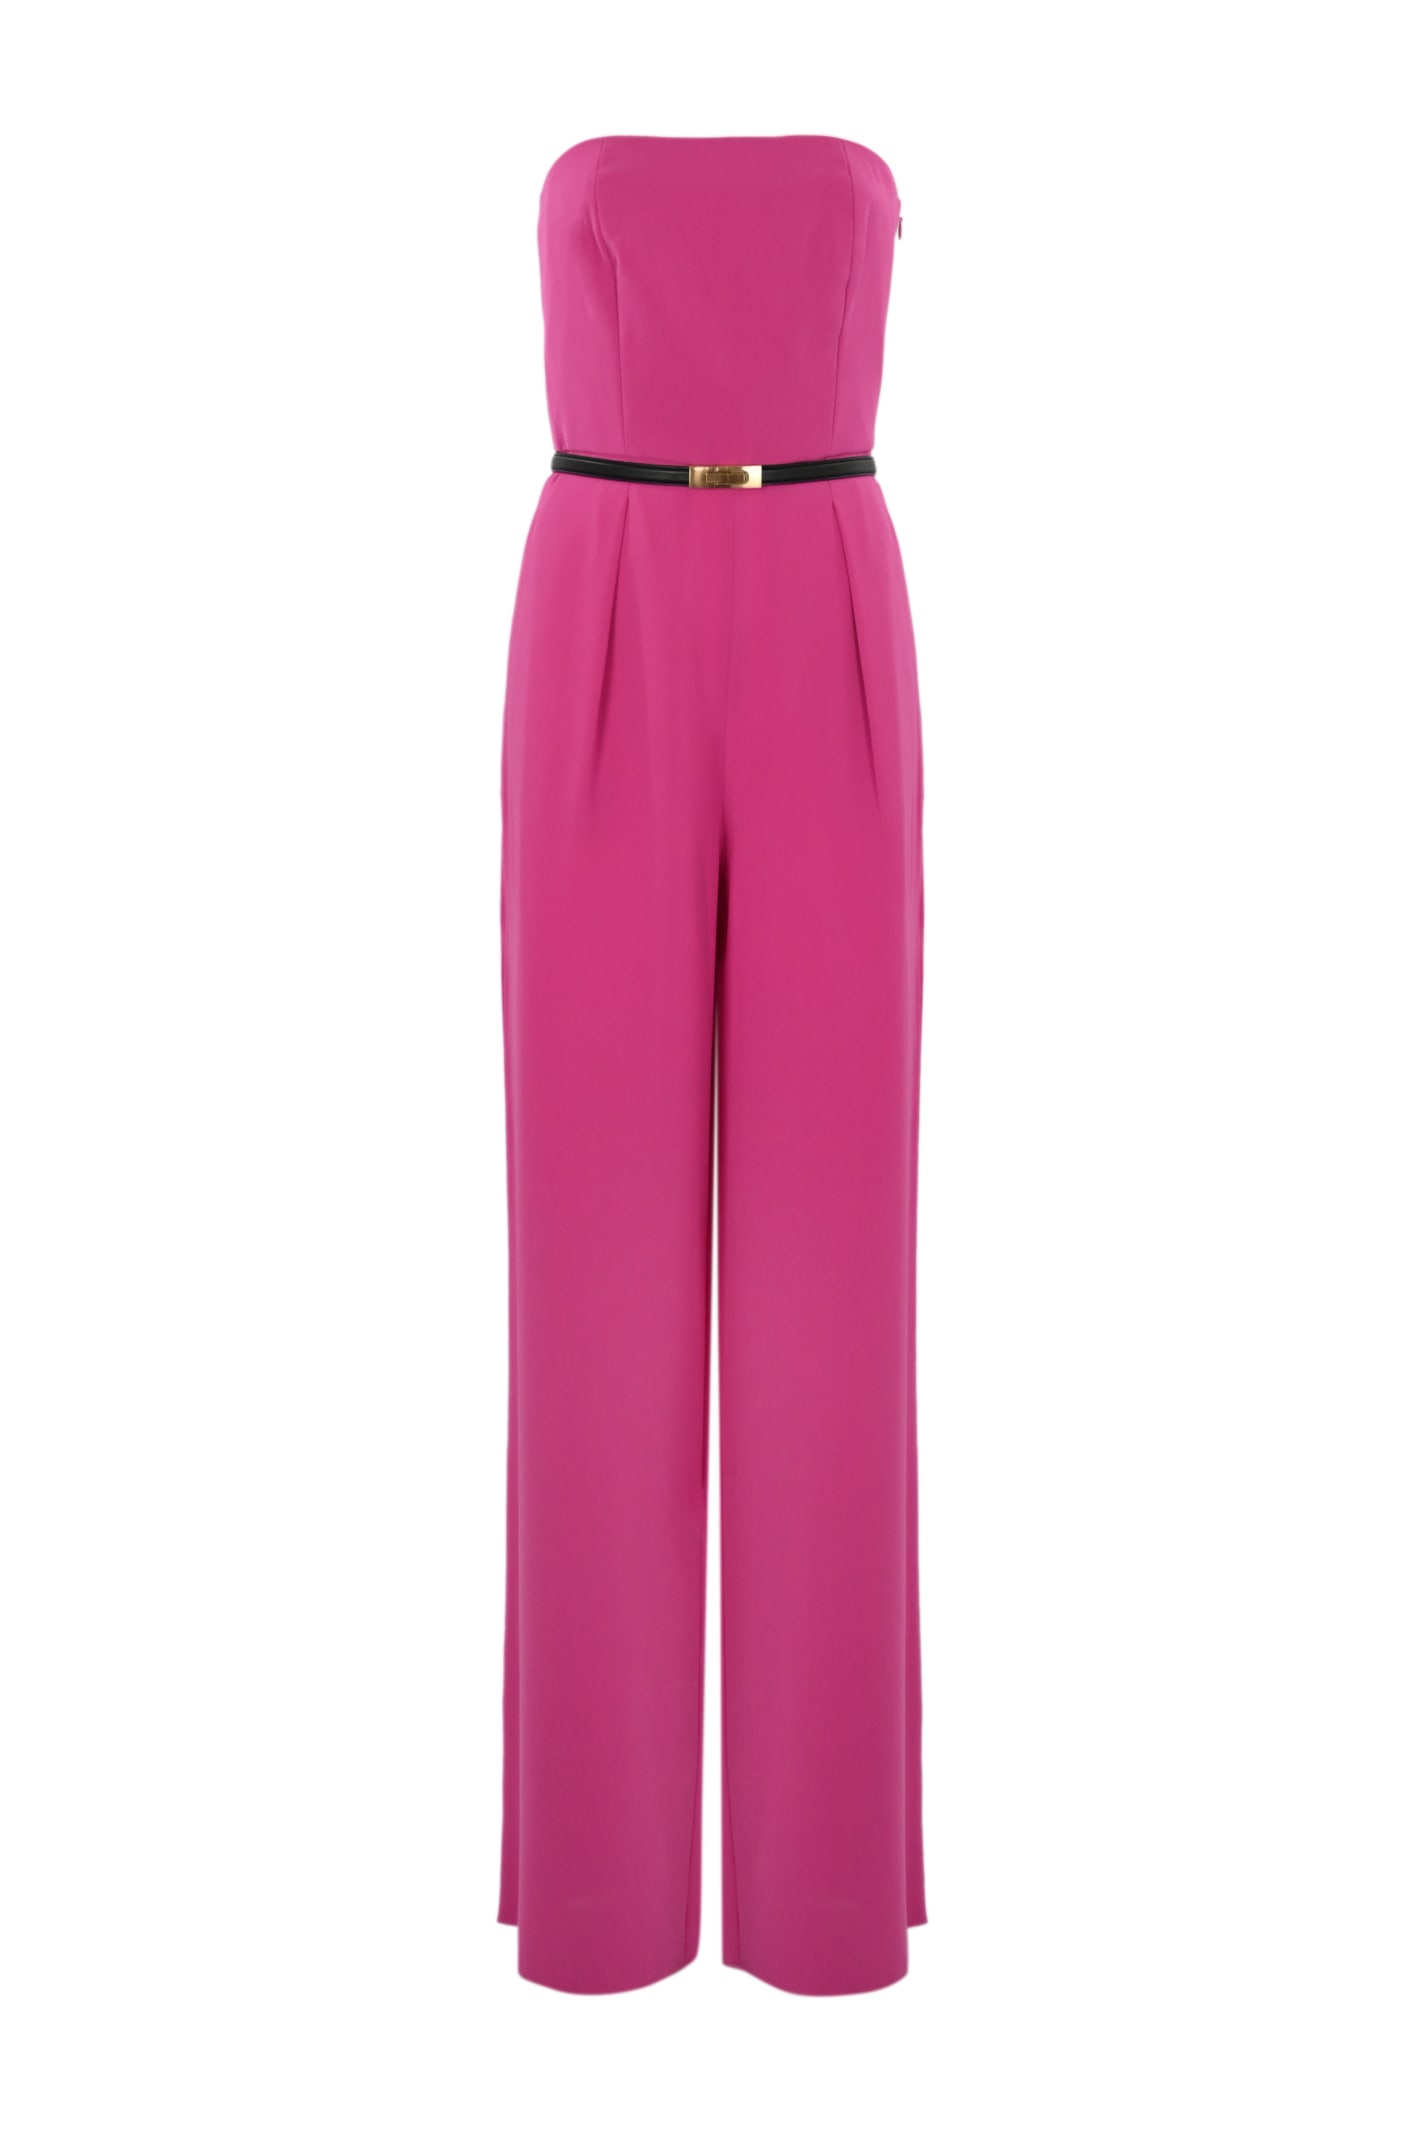 MAX MARA ARPE BUSTIER JUMPSUIT IN CADY